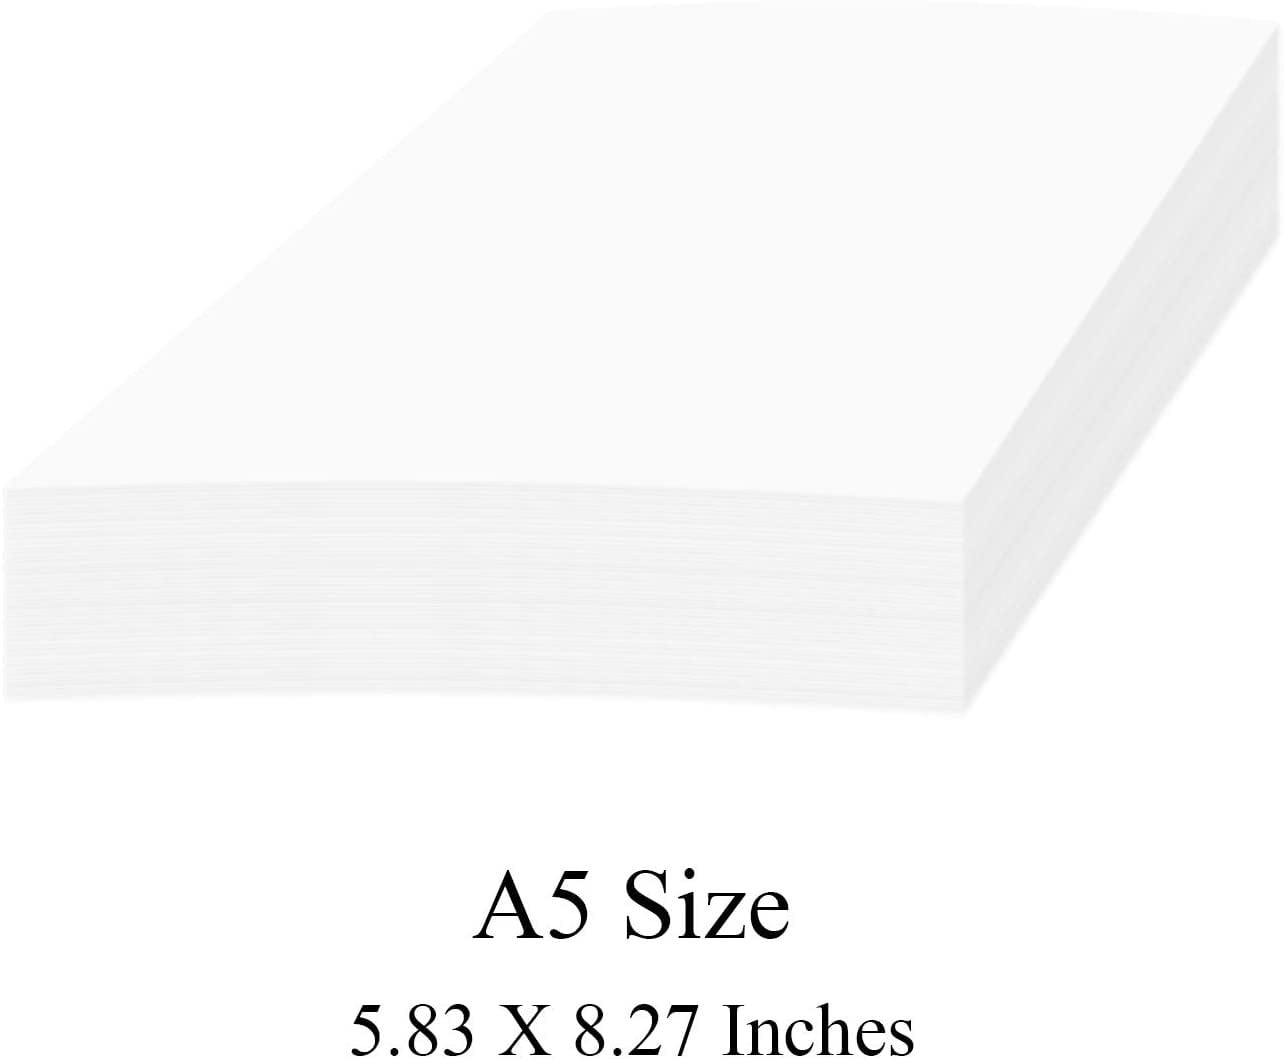 Writing Printing Cover Cardstock A4 Premium White Card Stock Paper 210 x 297 mm Great for Copy 8.27 x 11.69 176gsm | 65lb 50 Sheets per Pack